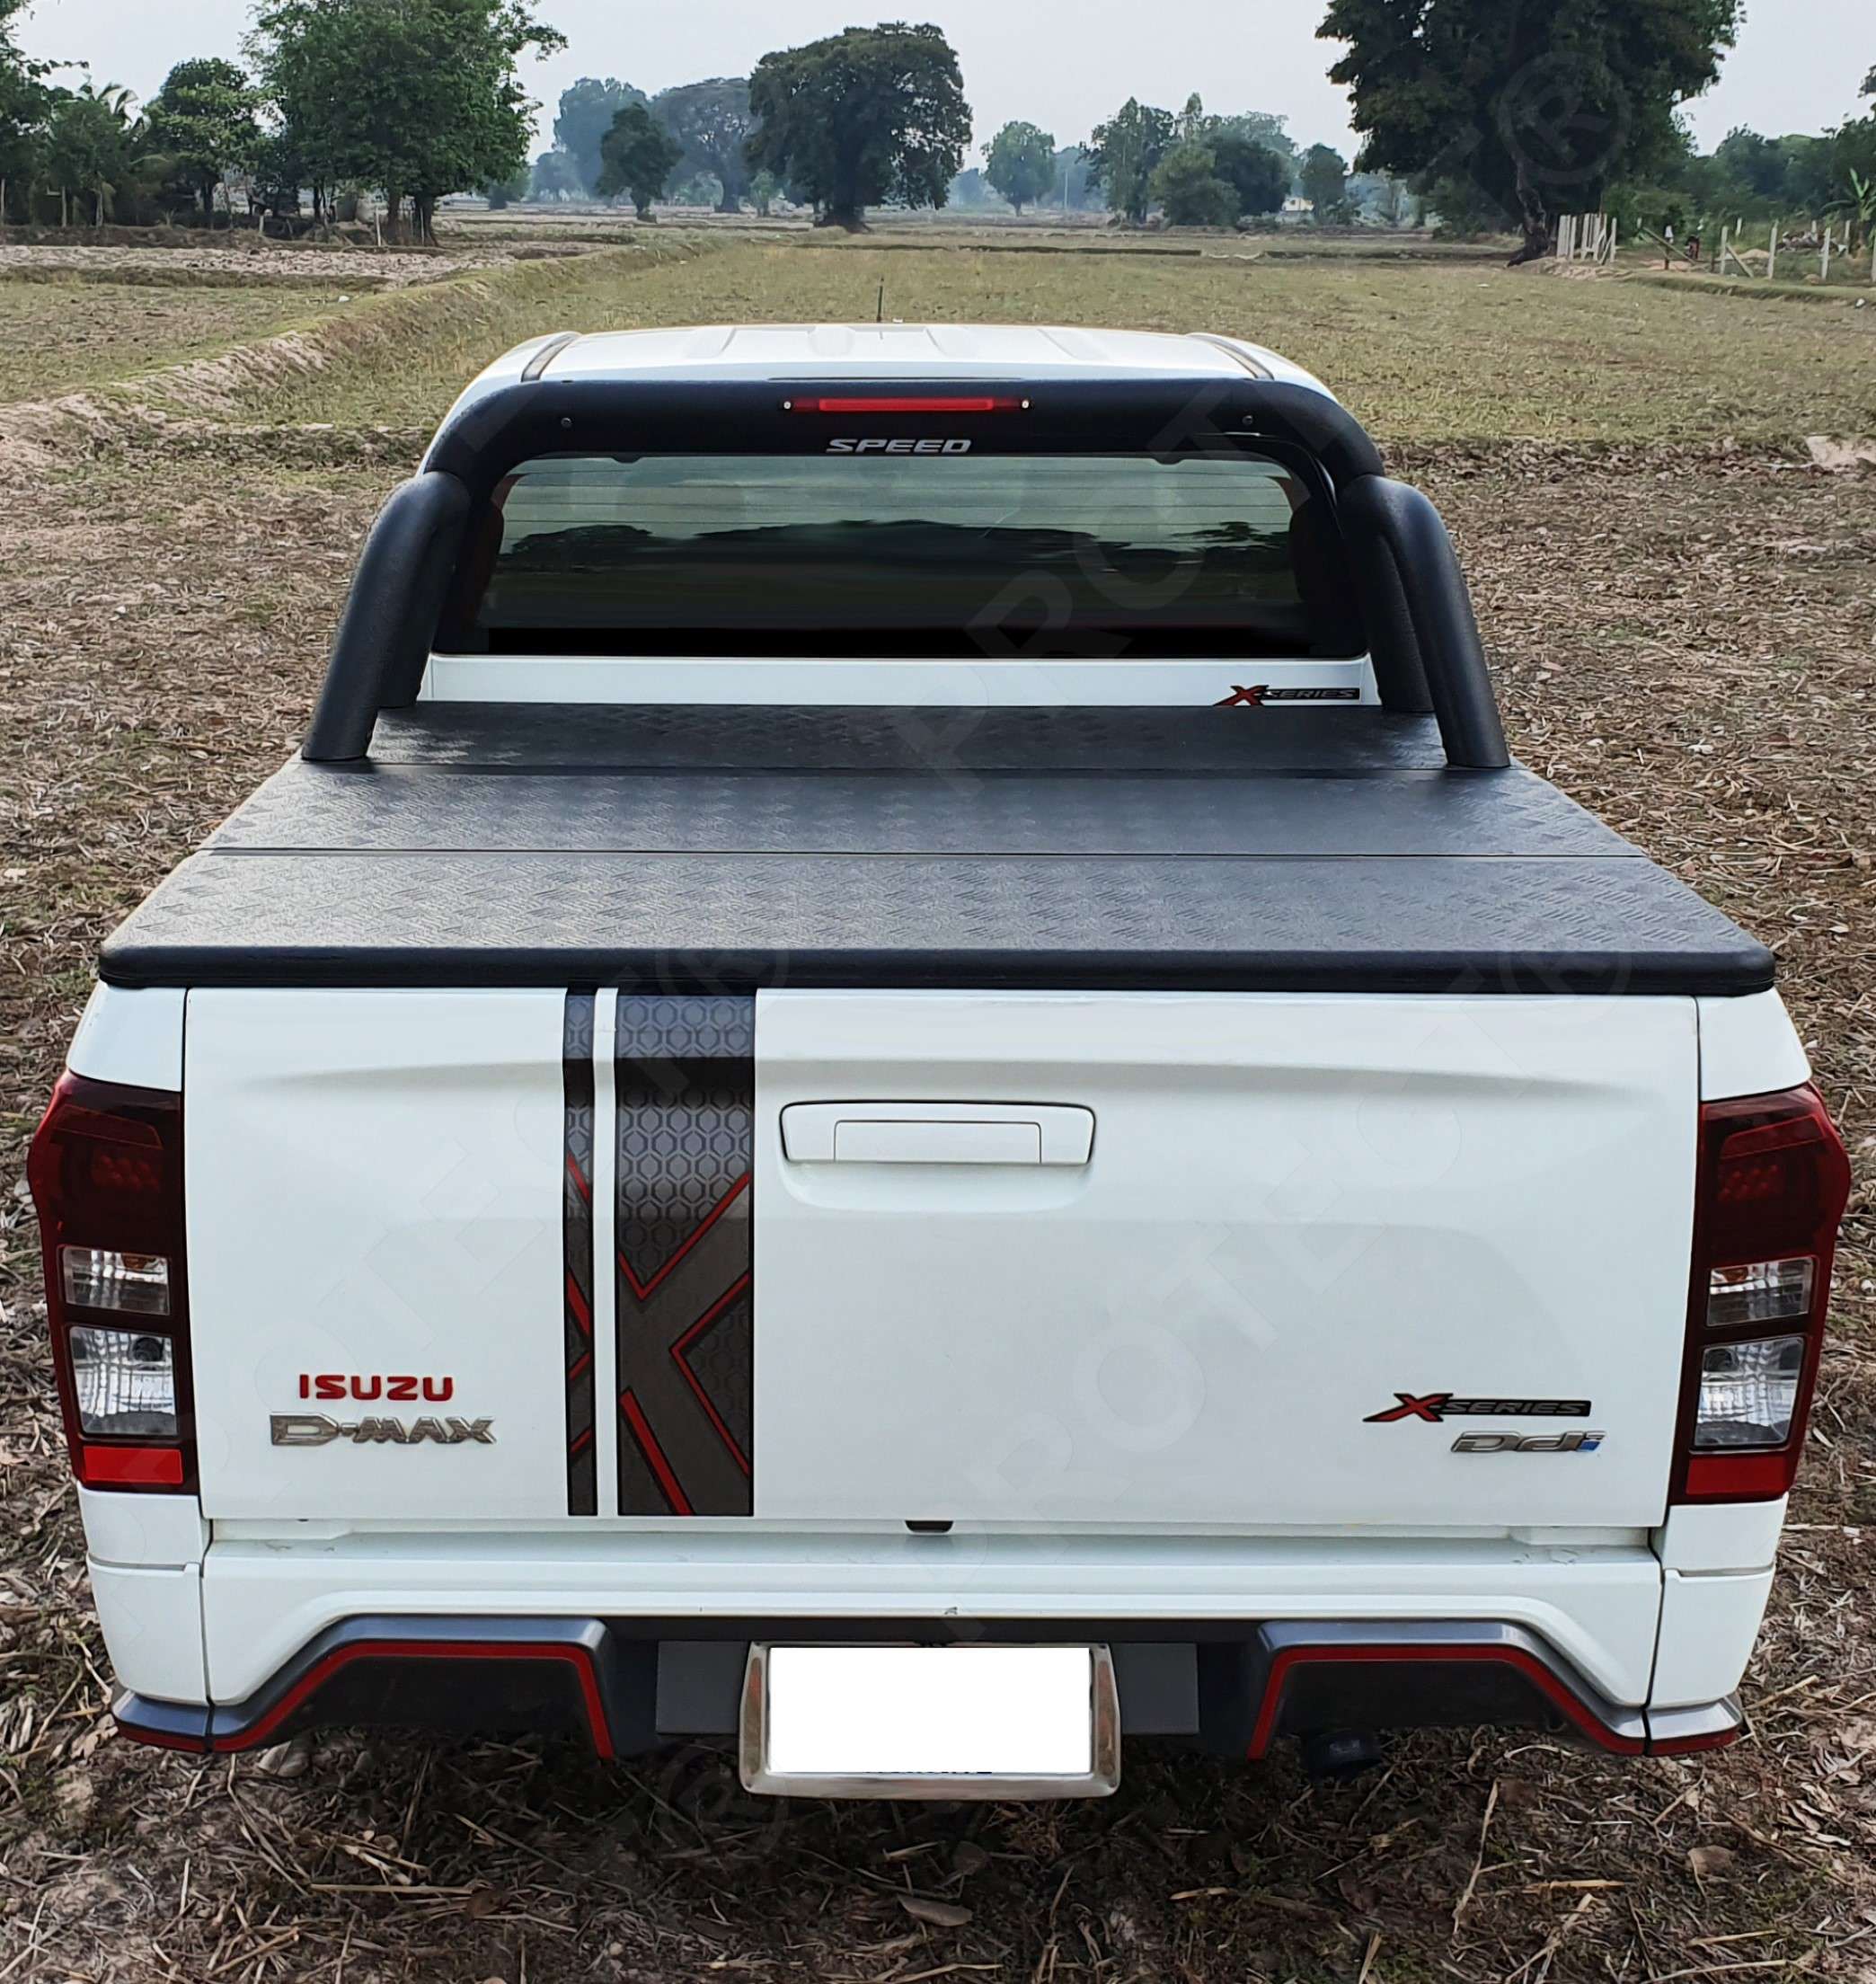 PROTECT cover foldable aluminum loading compartment cover with roll bar for Isuzu D-Max Doppelkabine Bj. 2014-2022 -3